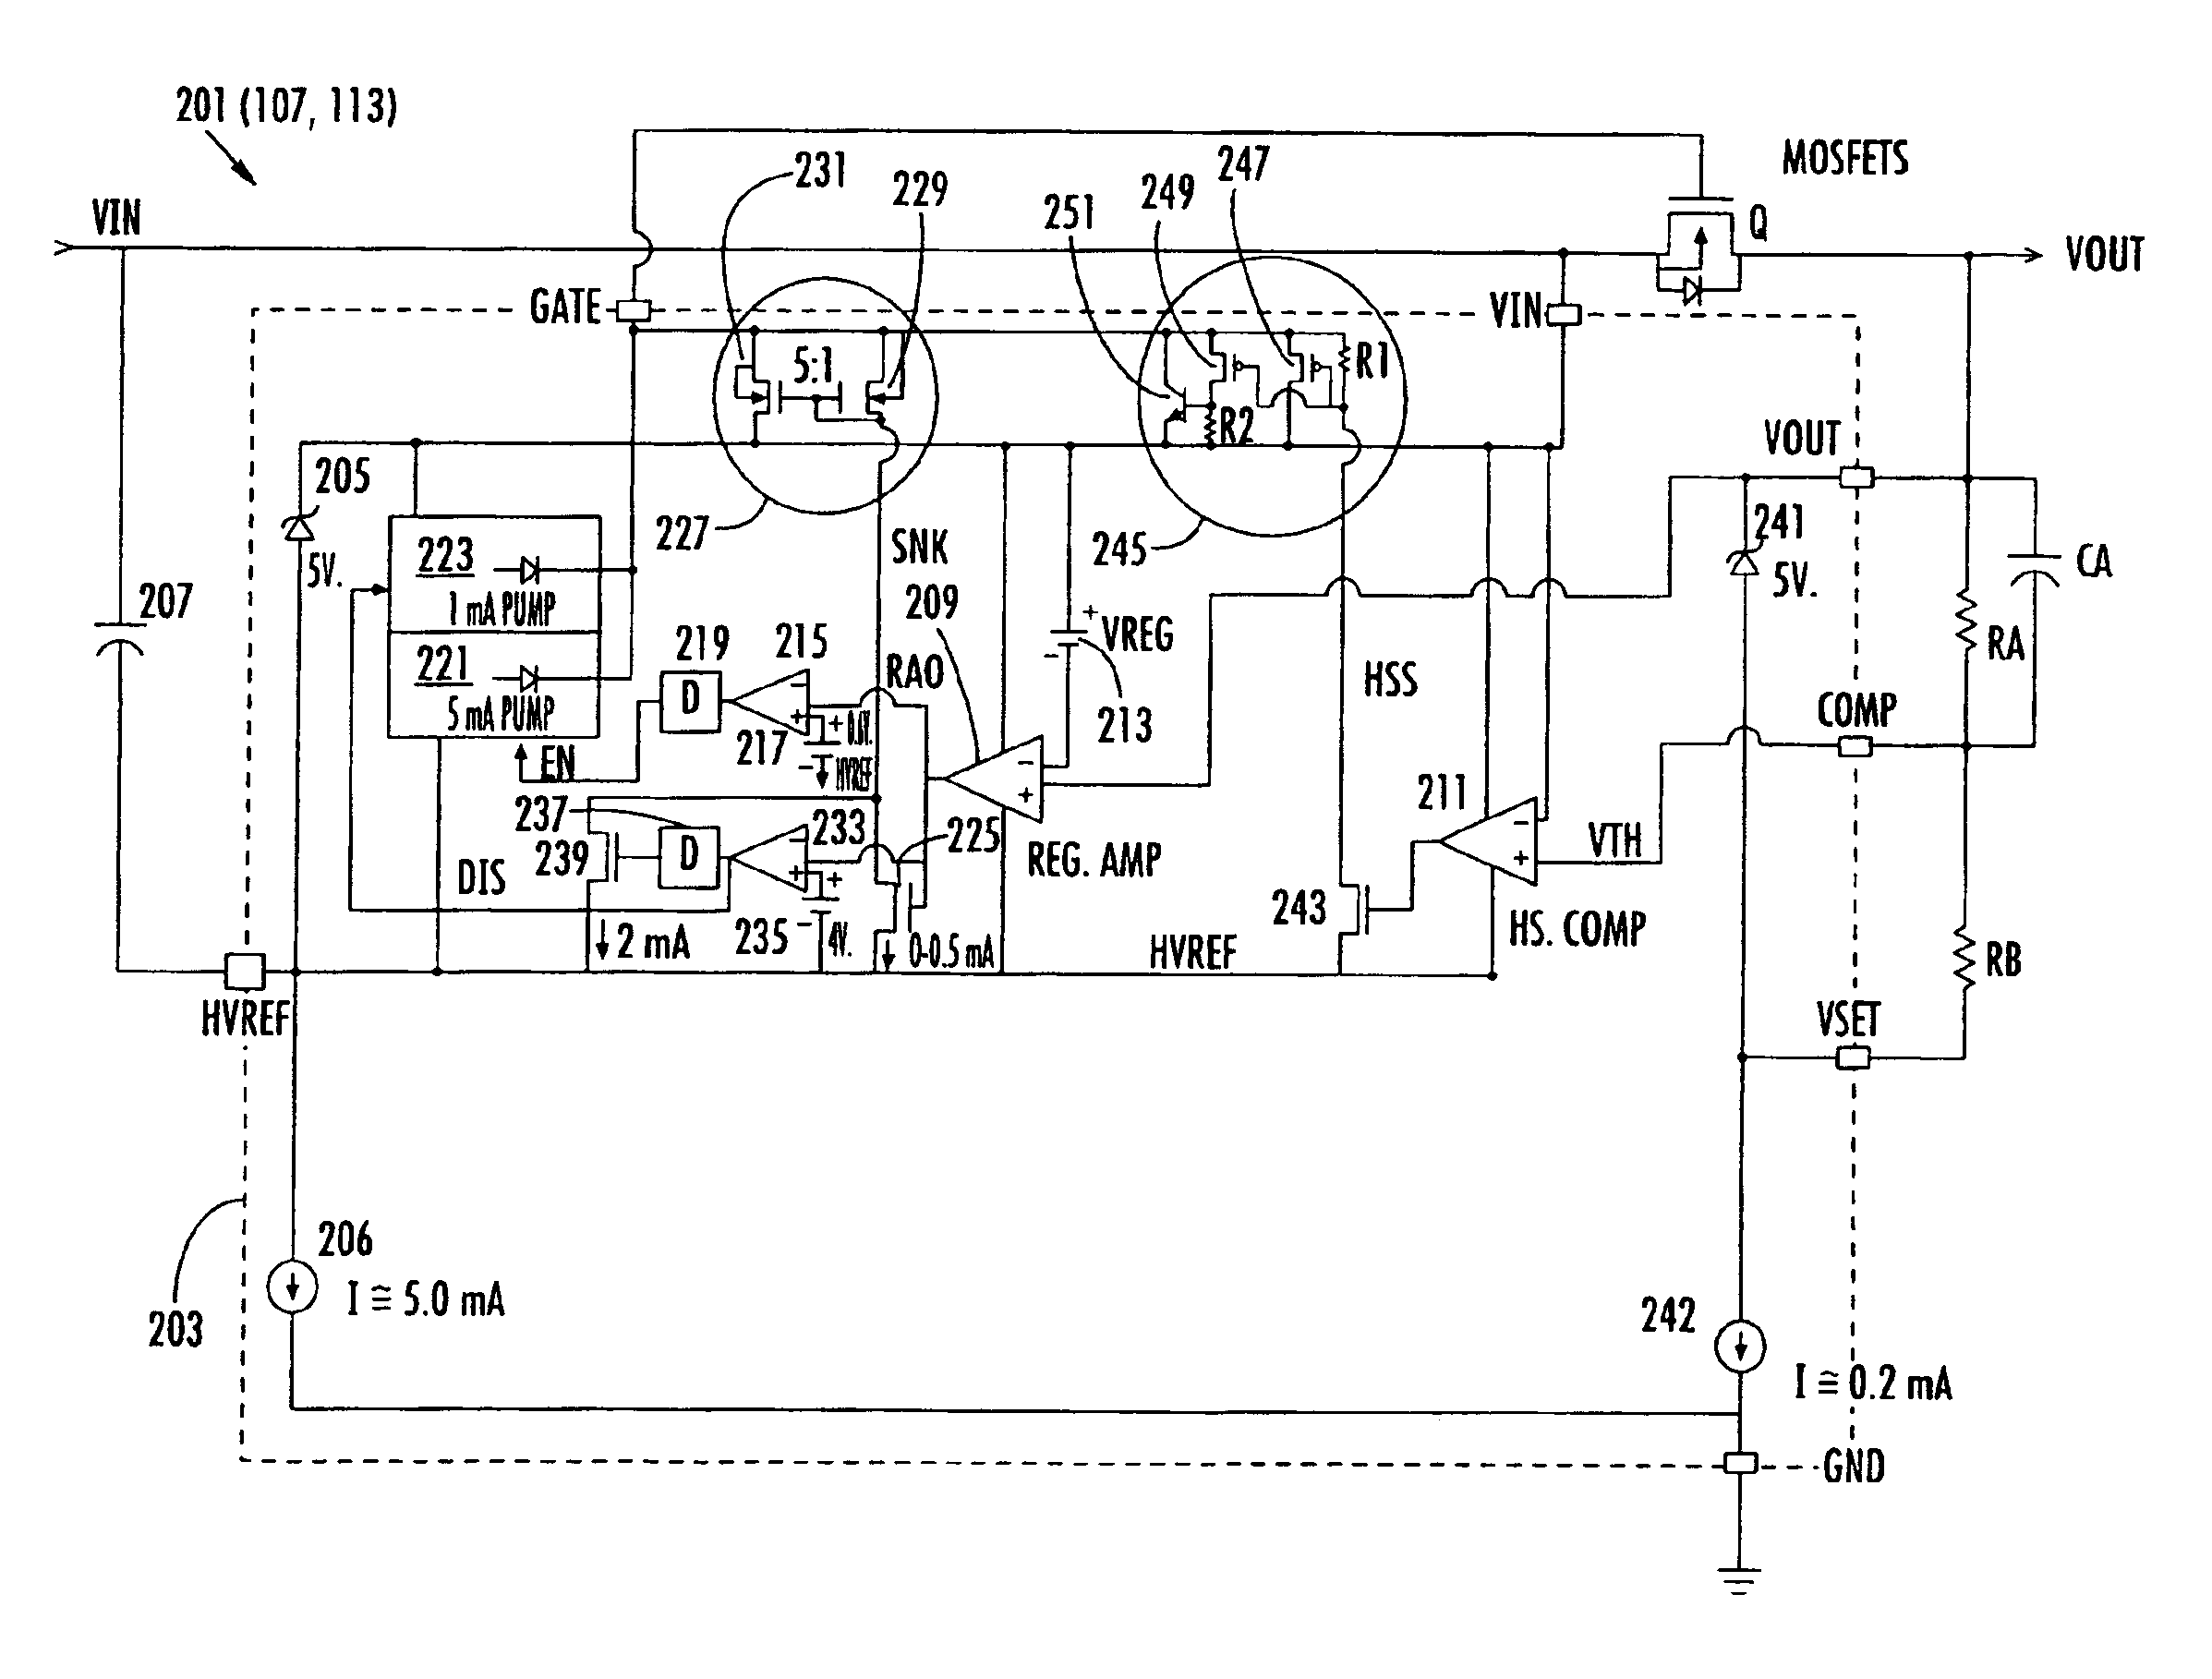 Controller for FET pass device